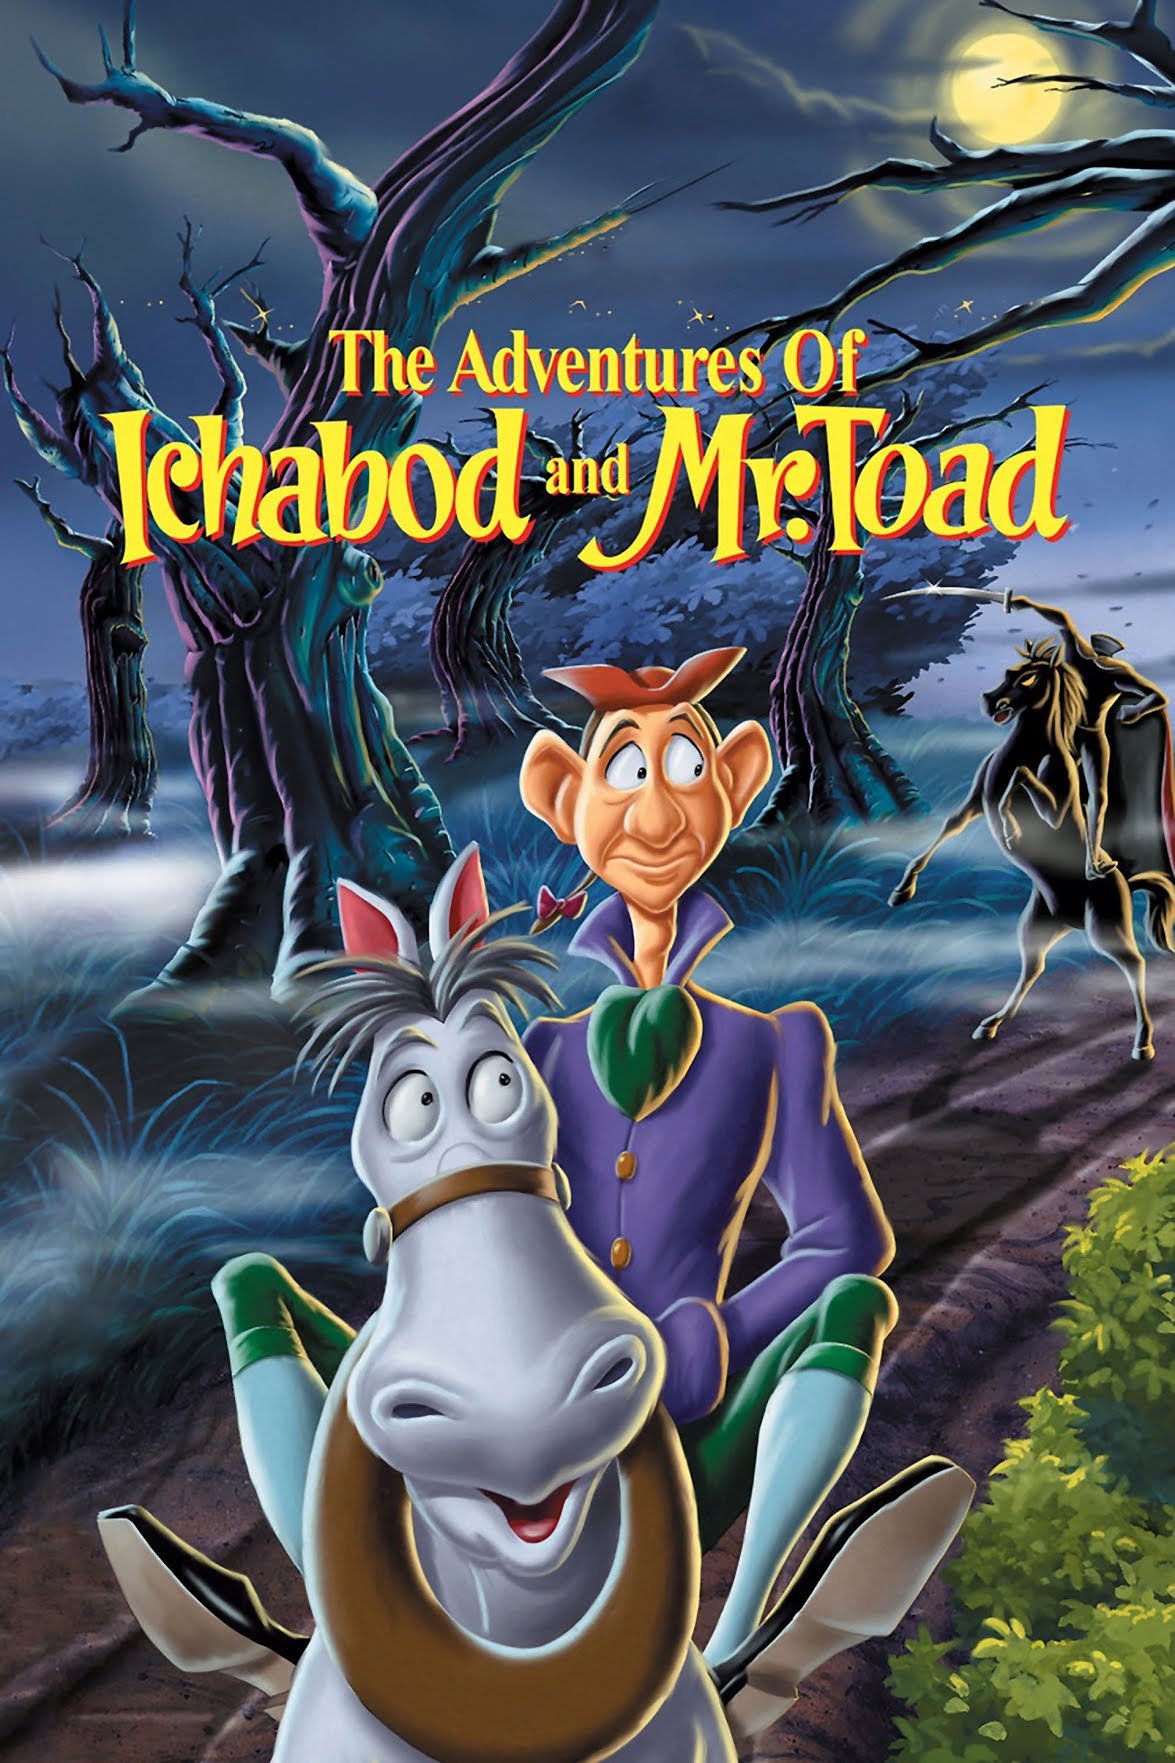 The Adventures of Ichabod and Mr. Toad- Disney Halloween movies